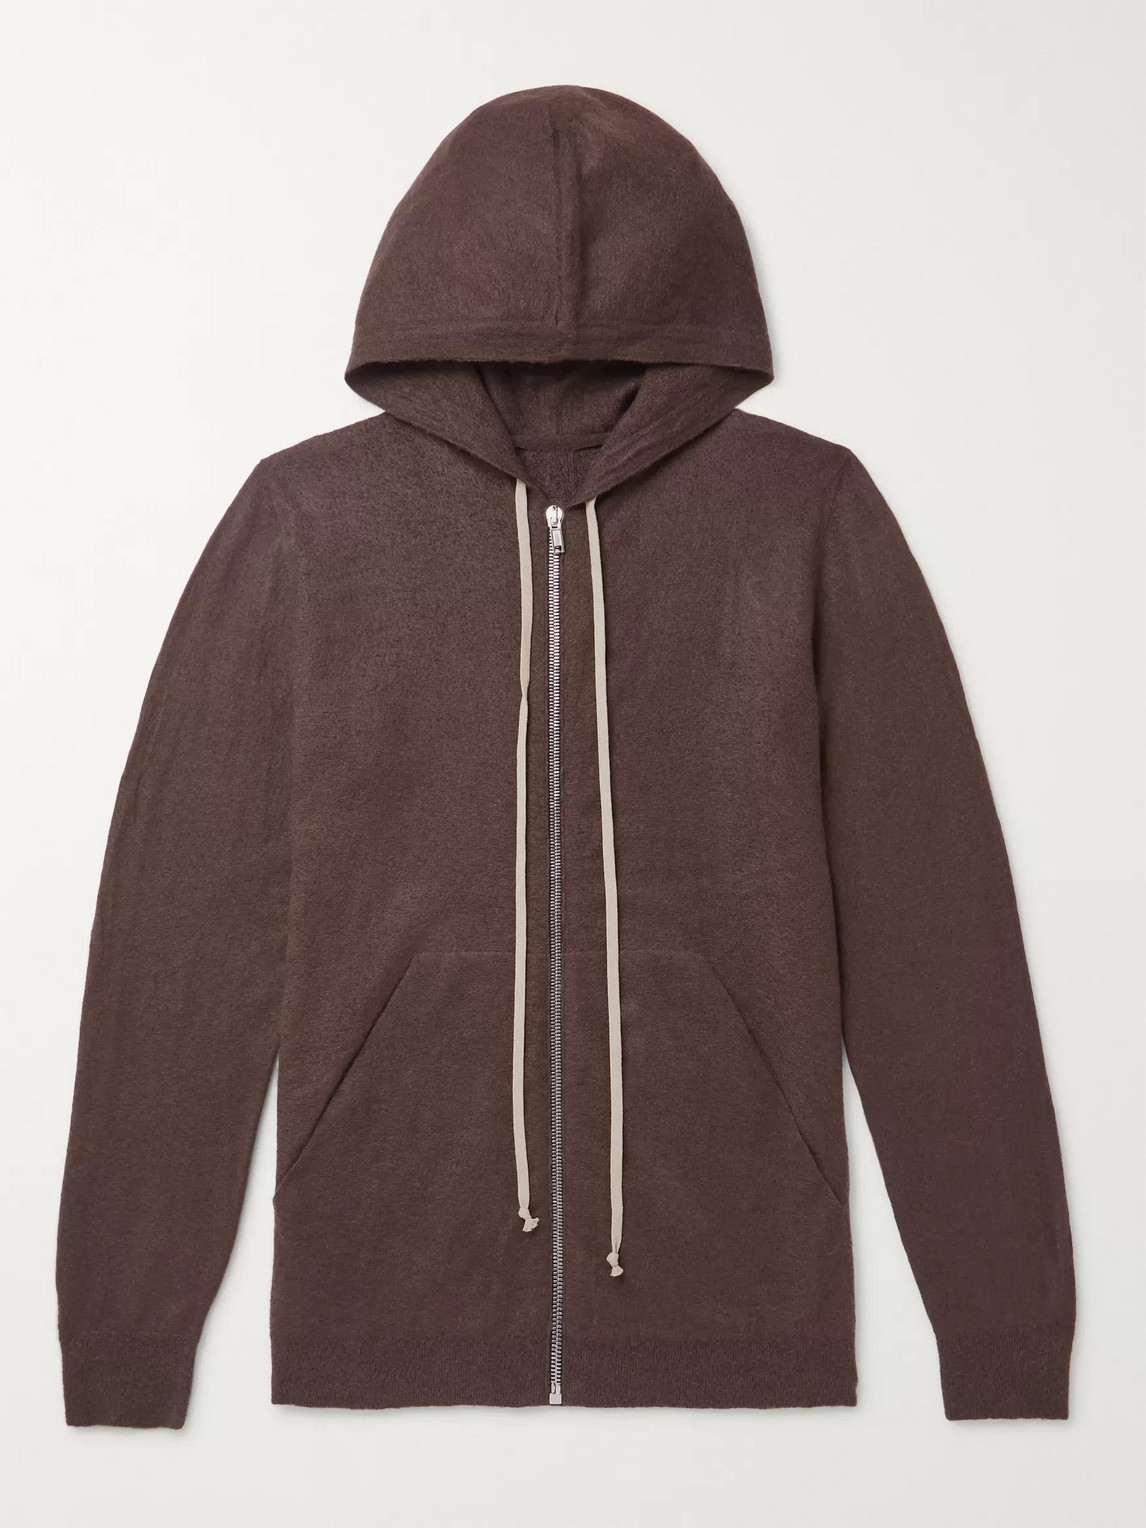 RICK OWENS OVERSIZED BOILED CASHMERE HOODIE